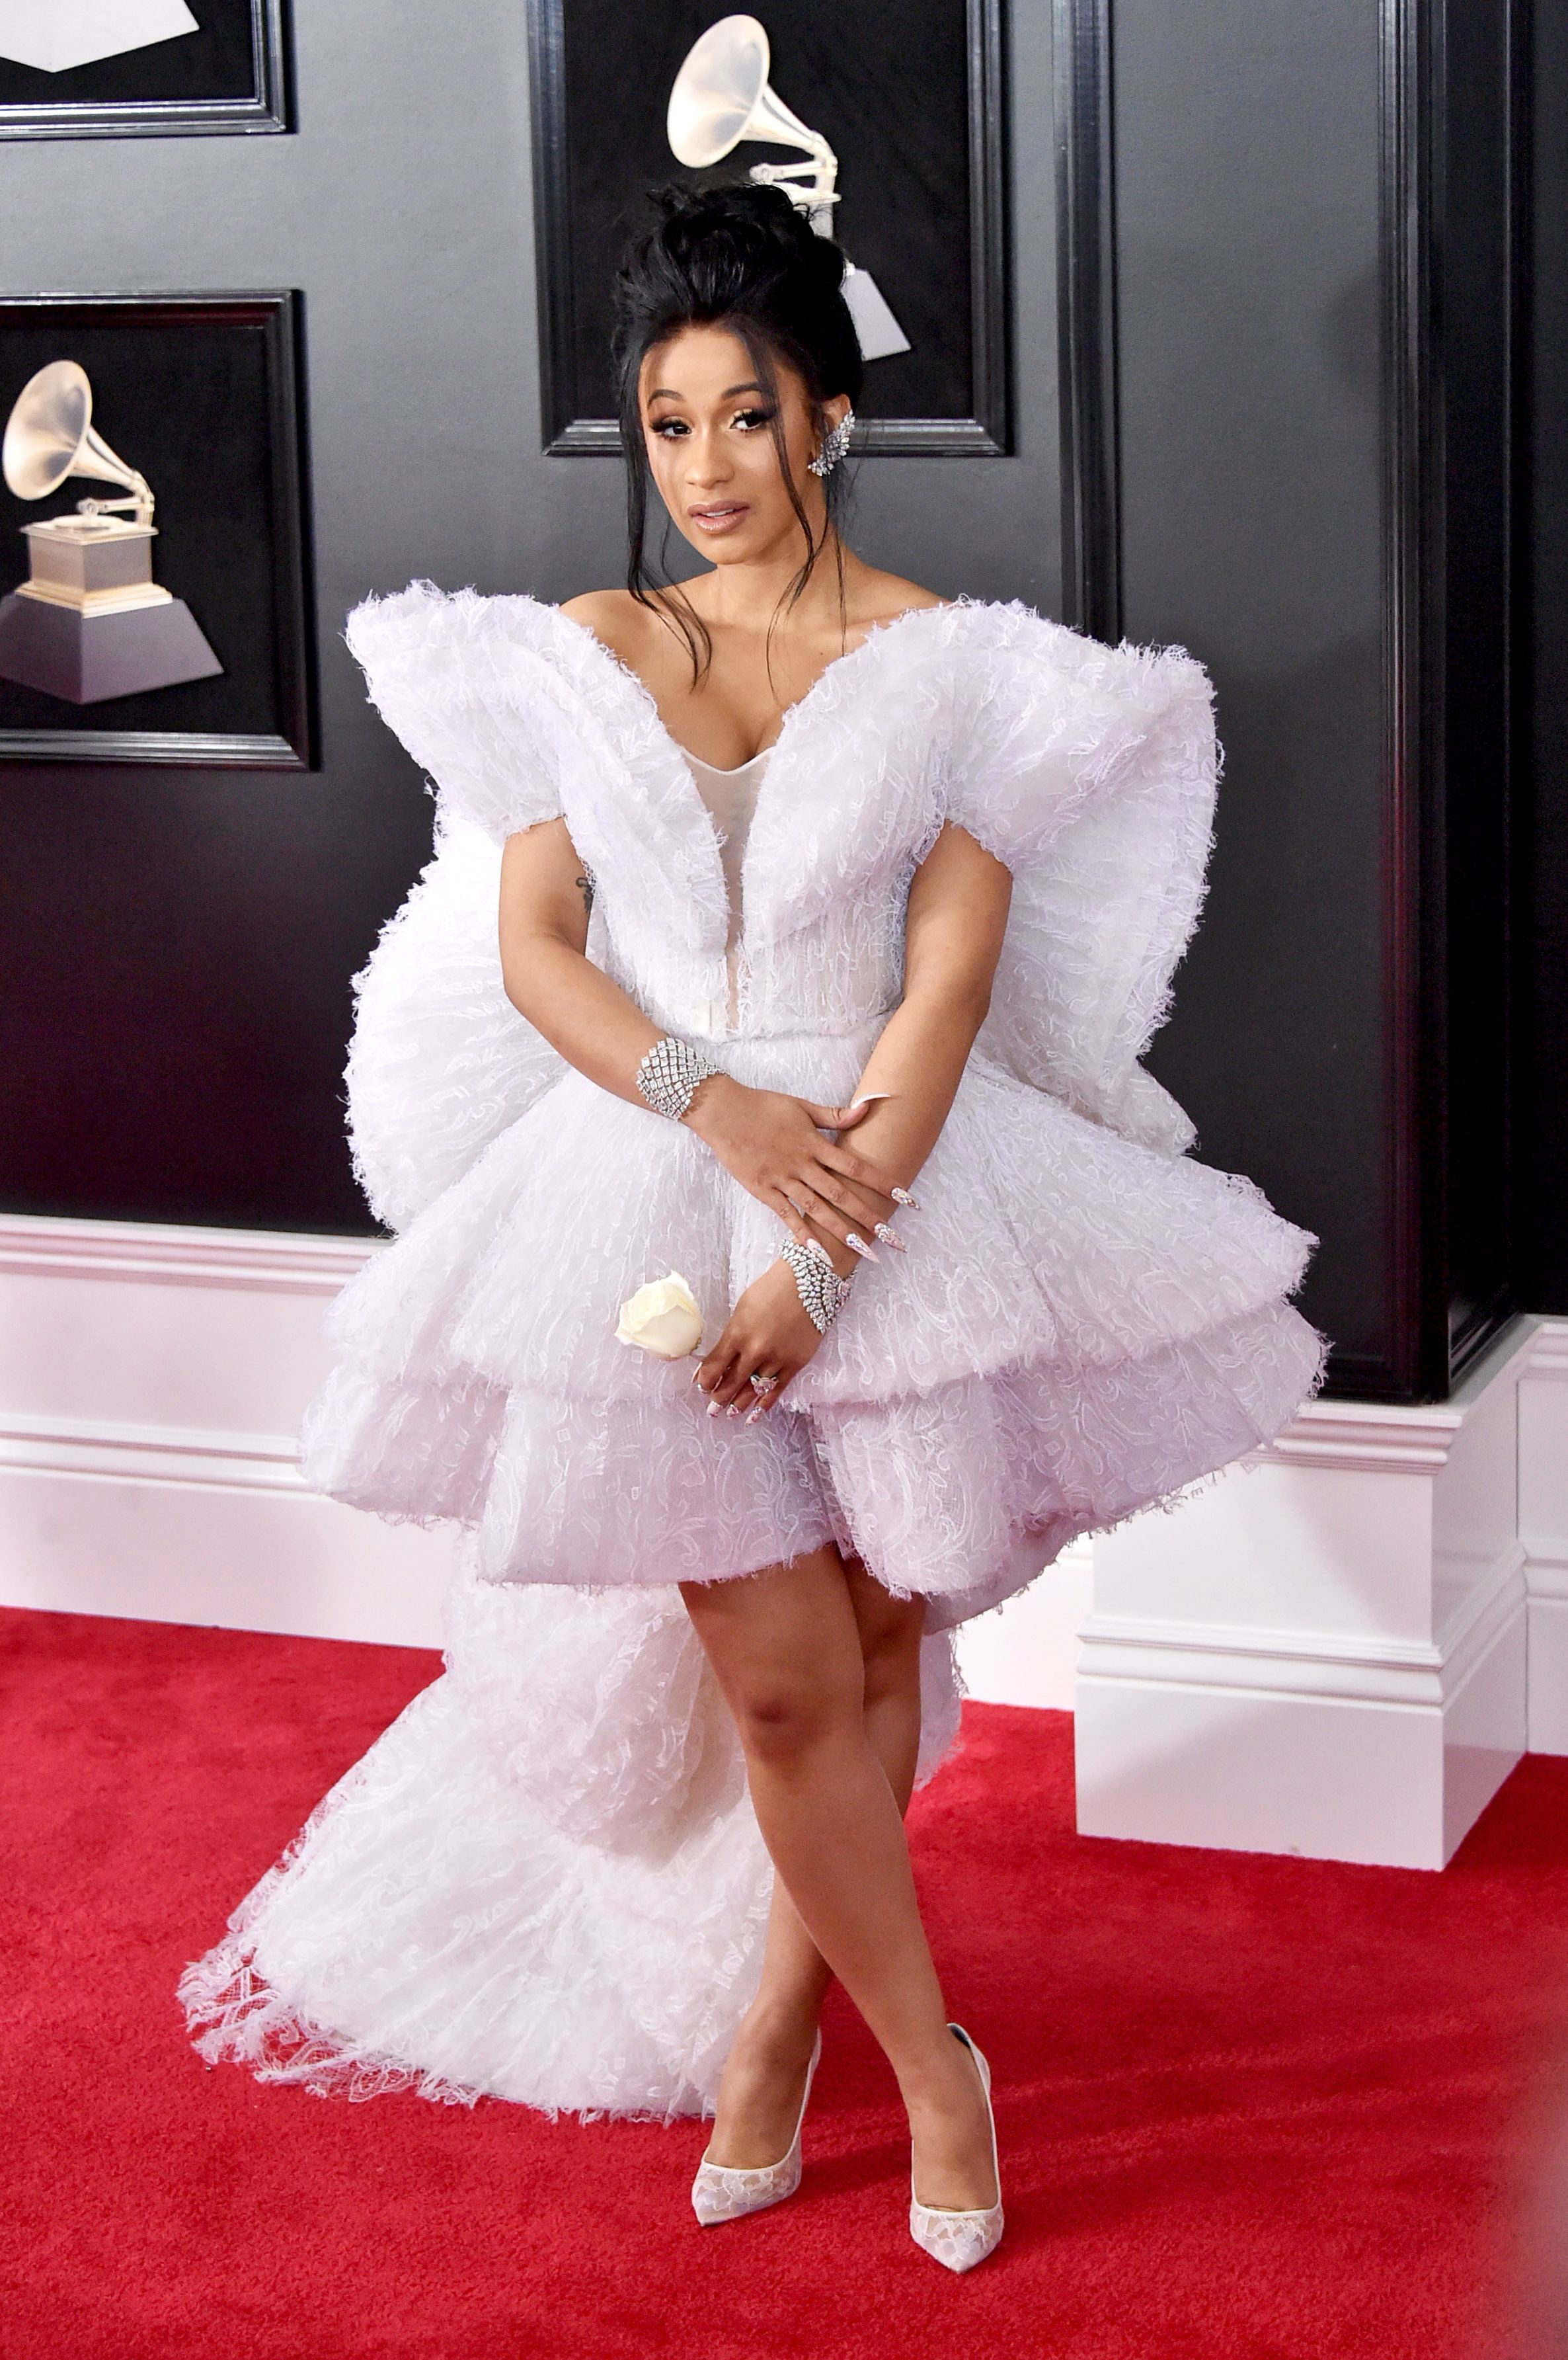 The Best-Dressed Stars on the Grammys 2018 Red Carpet